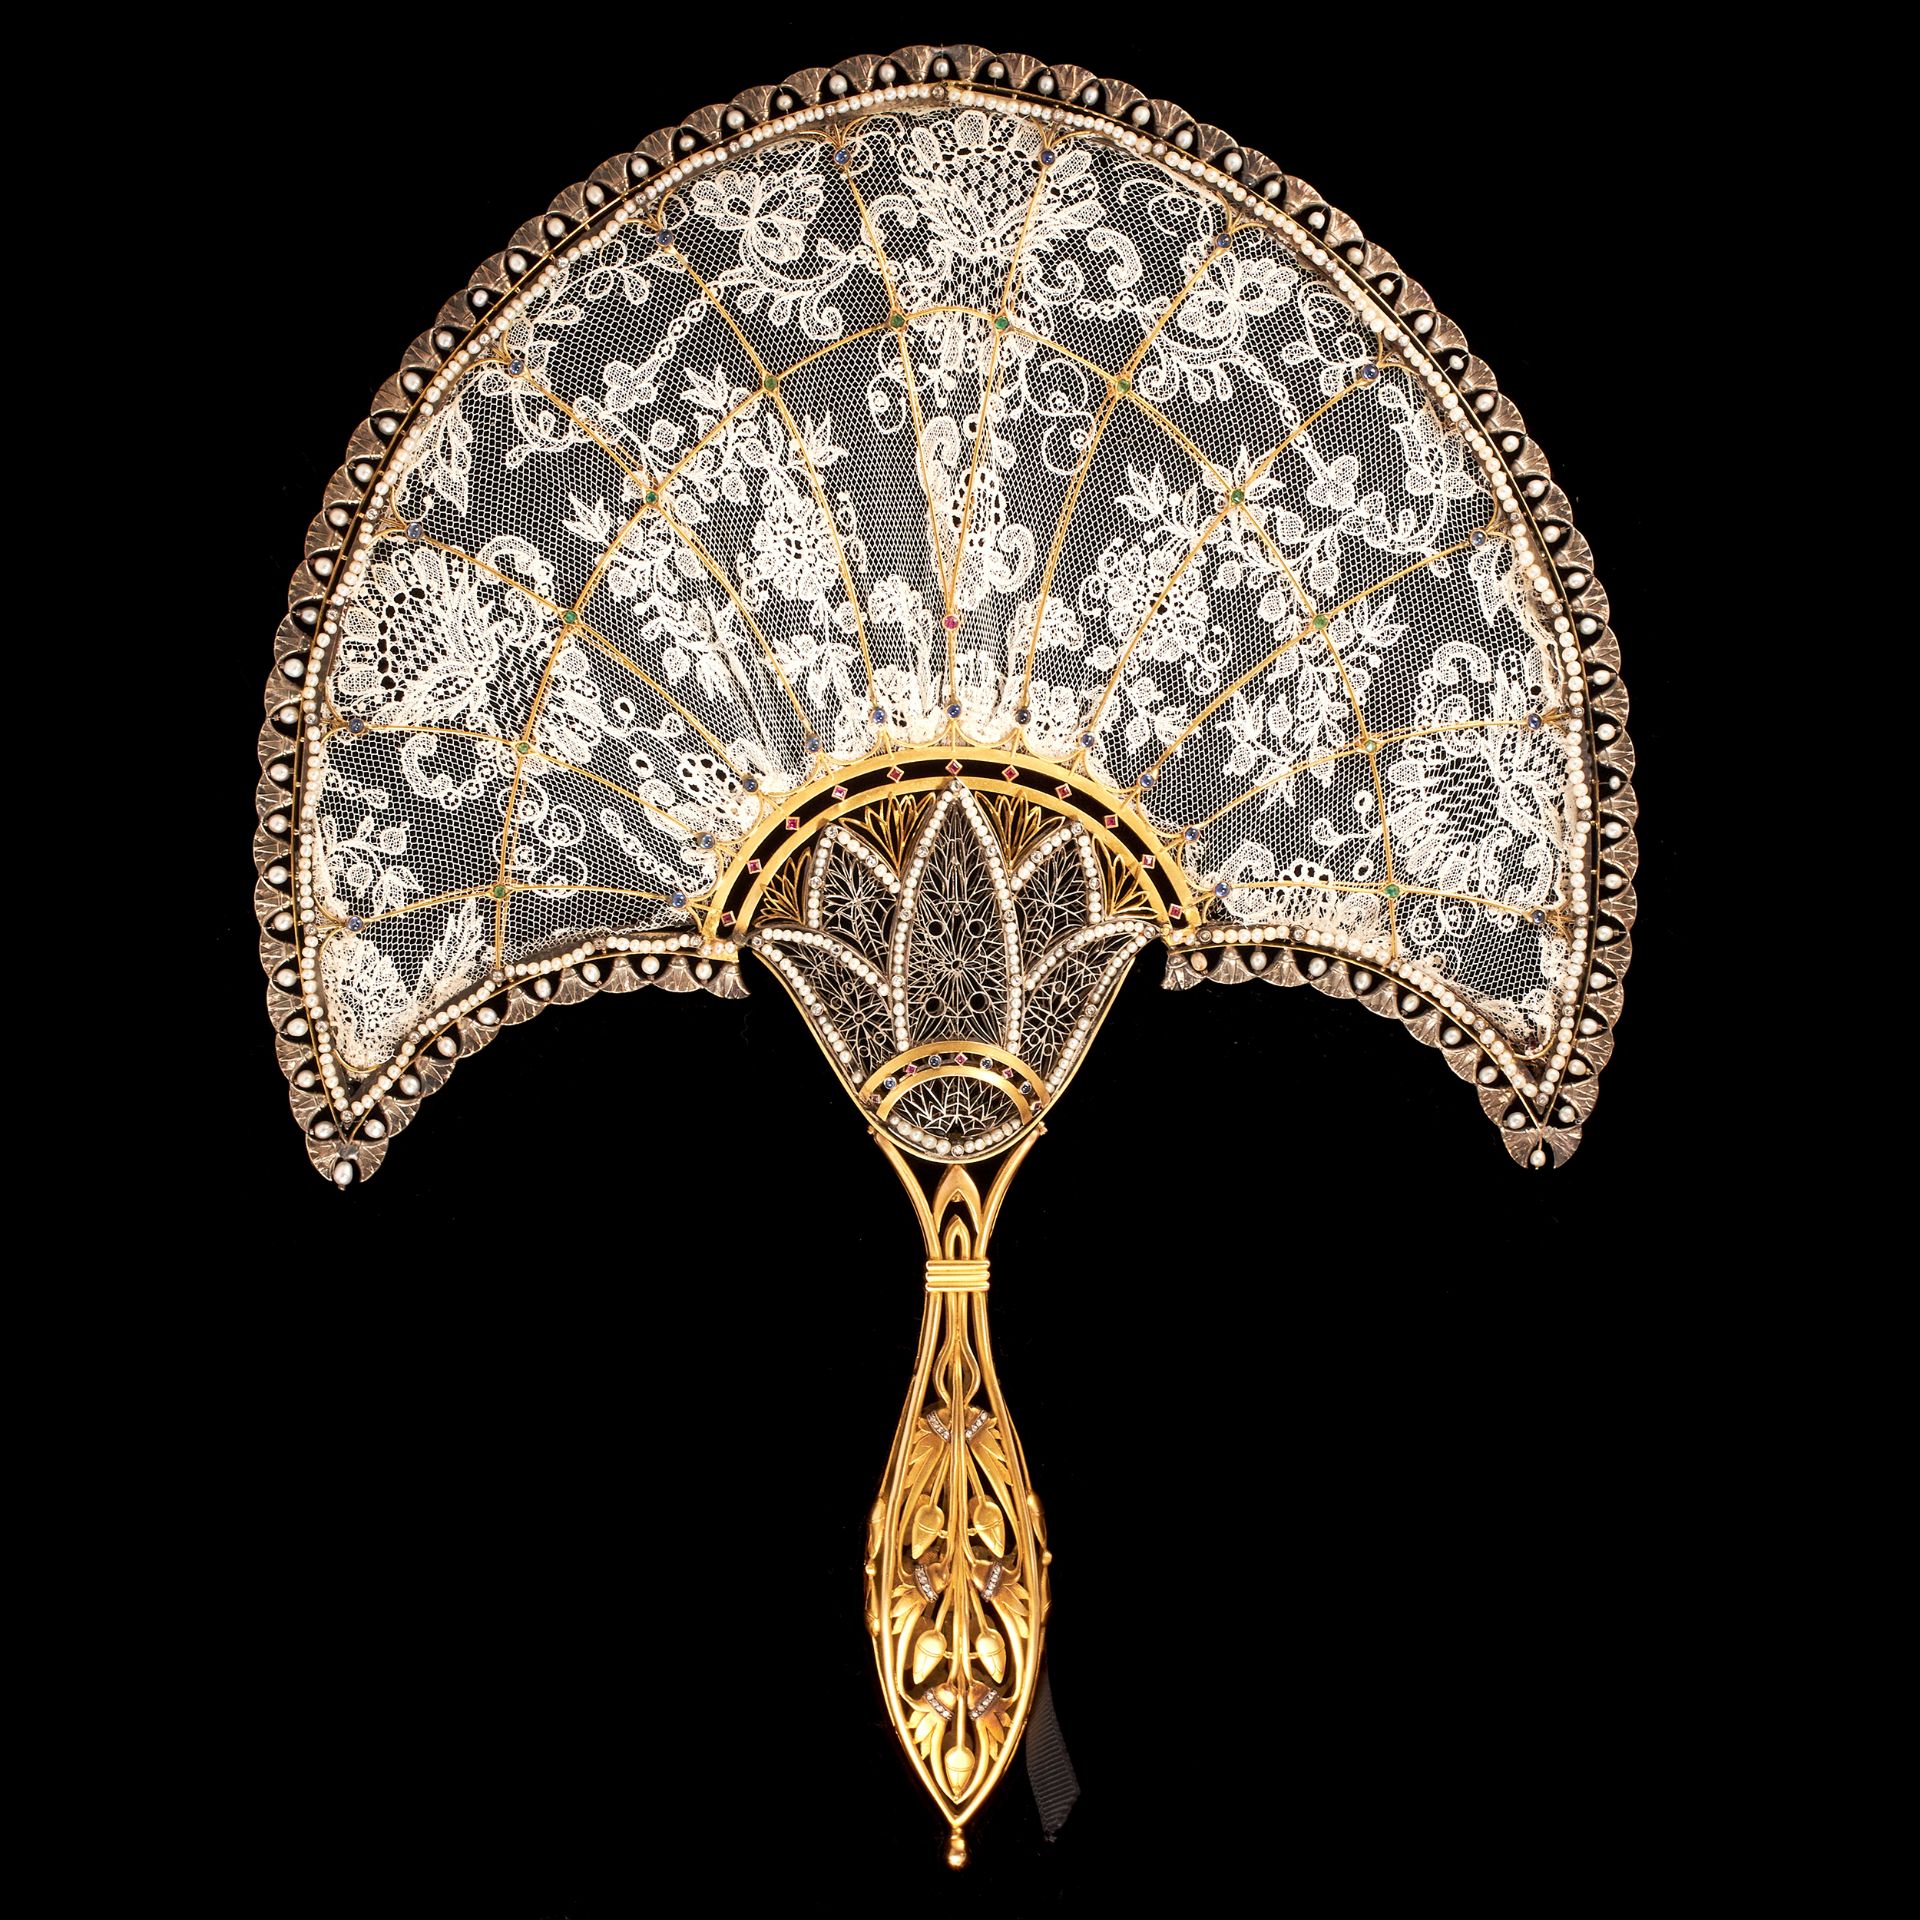 A MAGNIFICENT ANTIQUE JEWELLED LACE FAN in high carat yellow gold and silver, the crescent shaped